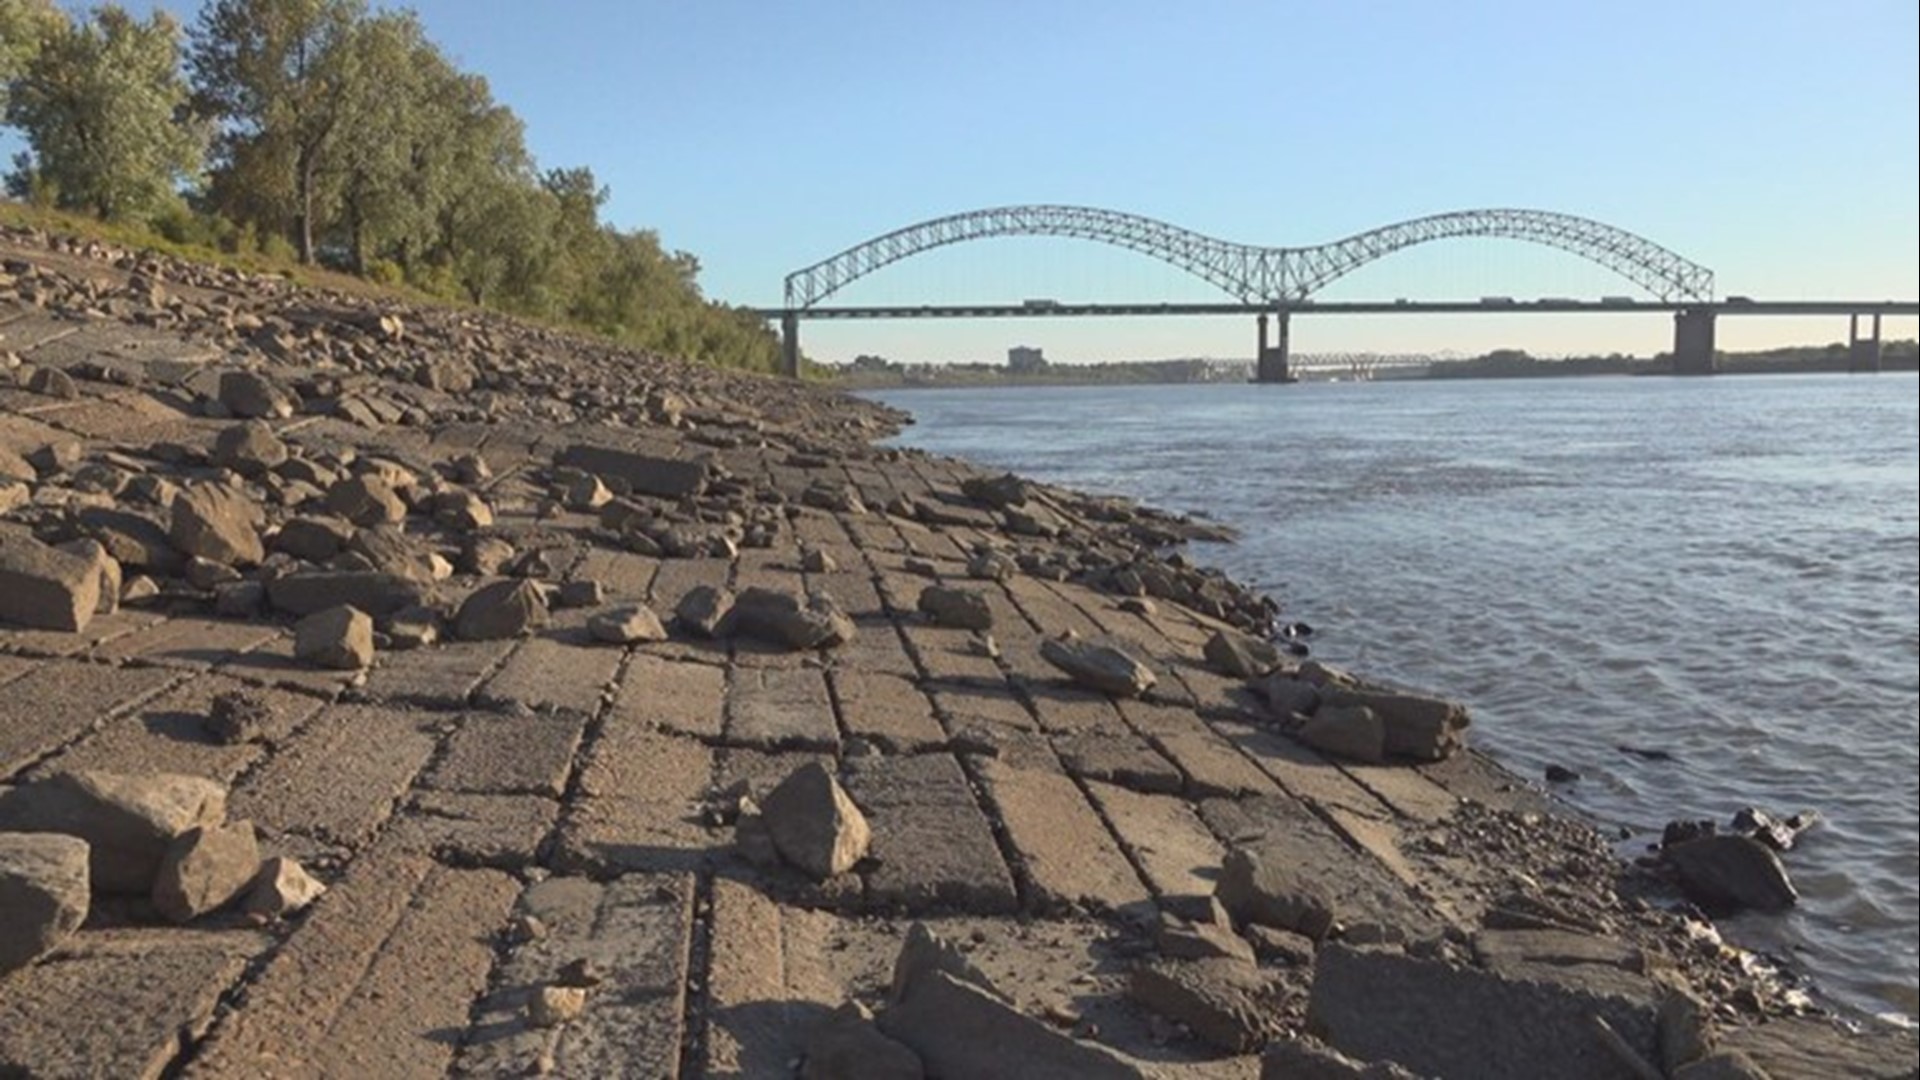 The Mighty Mississippi River is over 2,000 miles long and the devastating photos are what drew many people’s attention to the dry conditions.